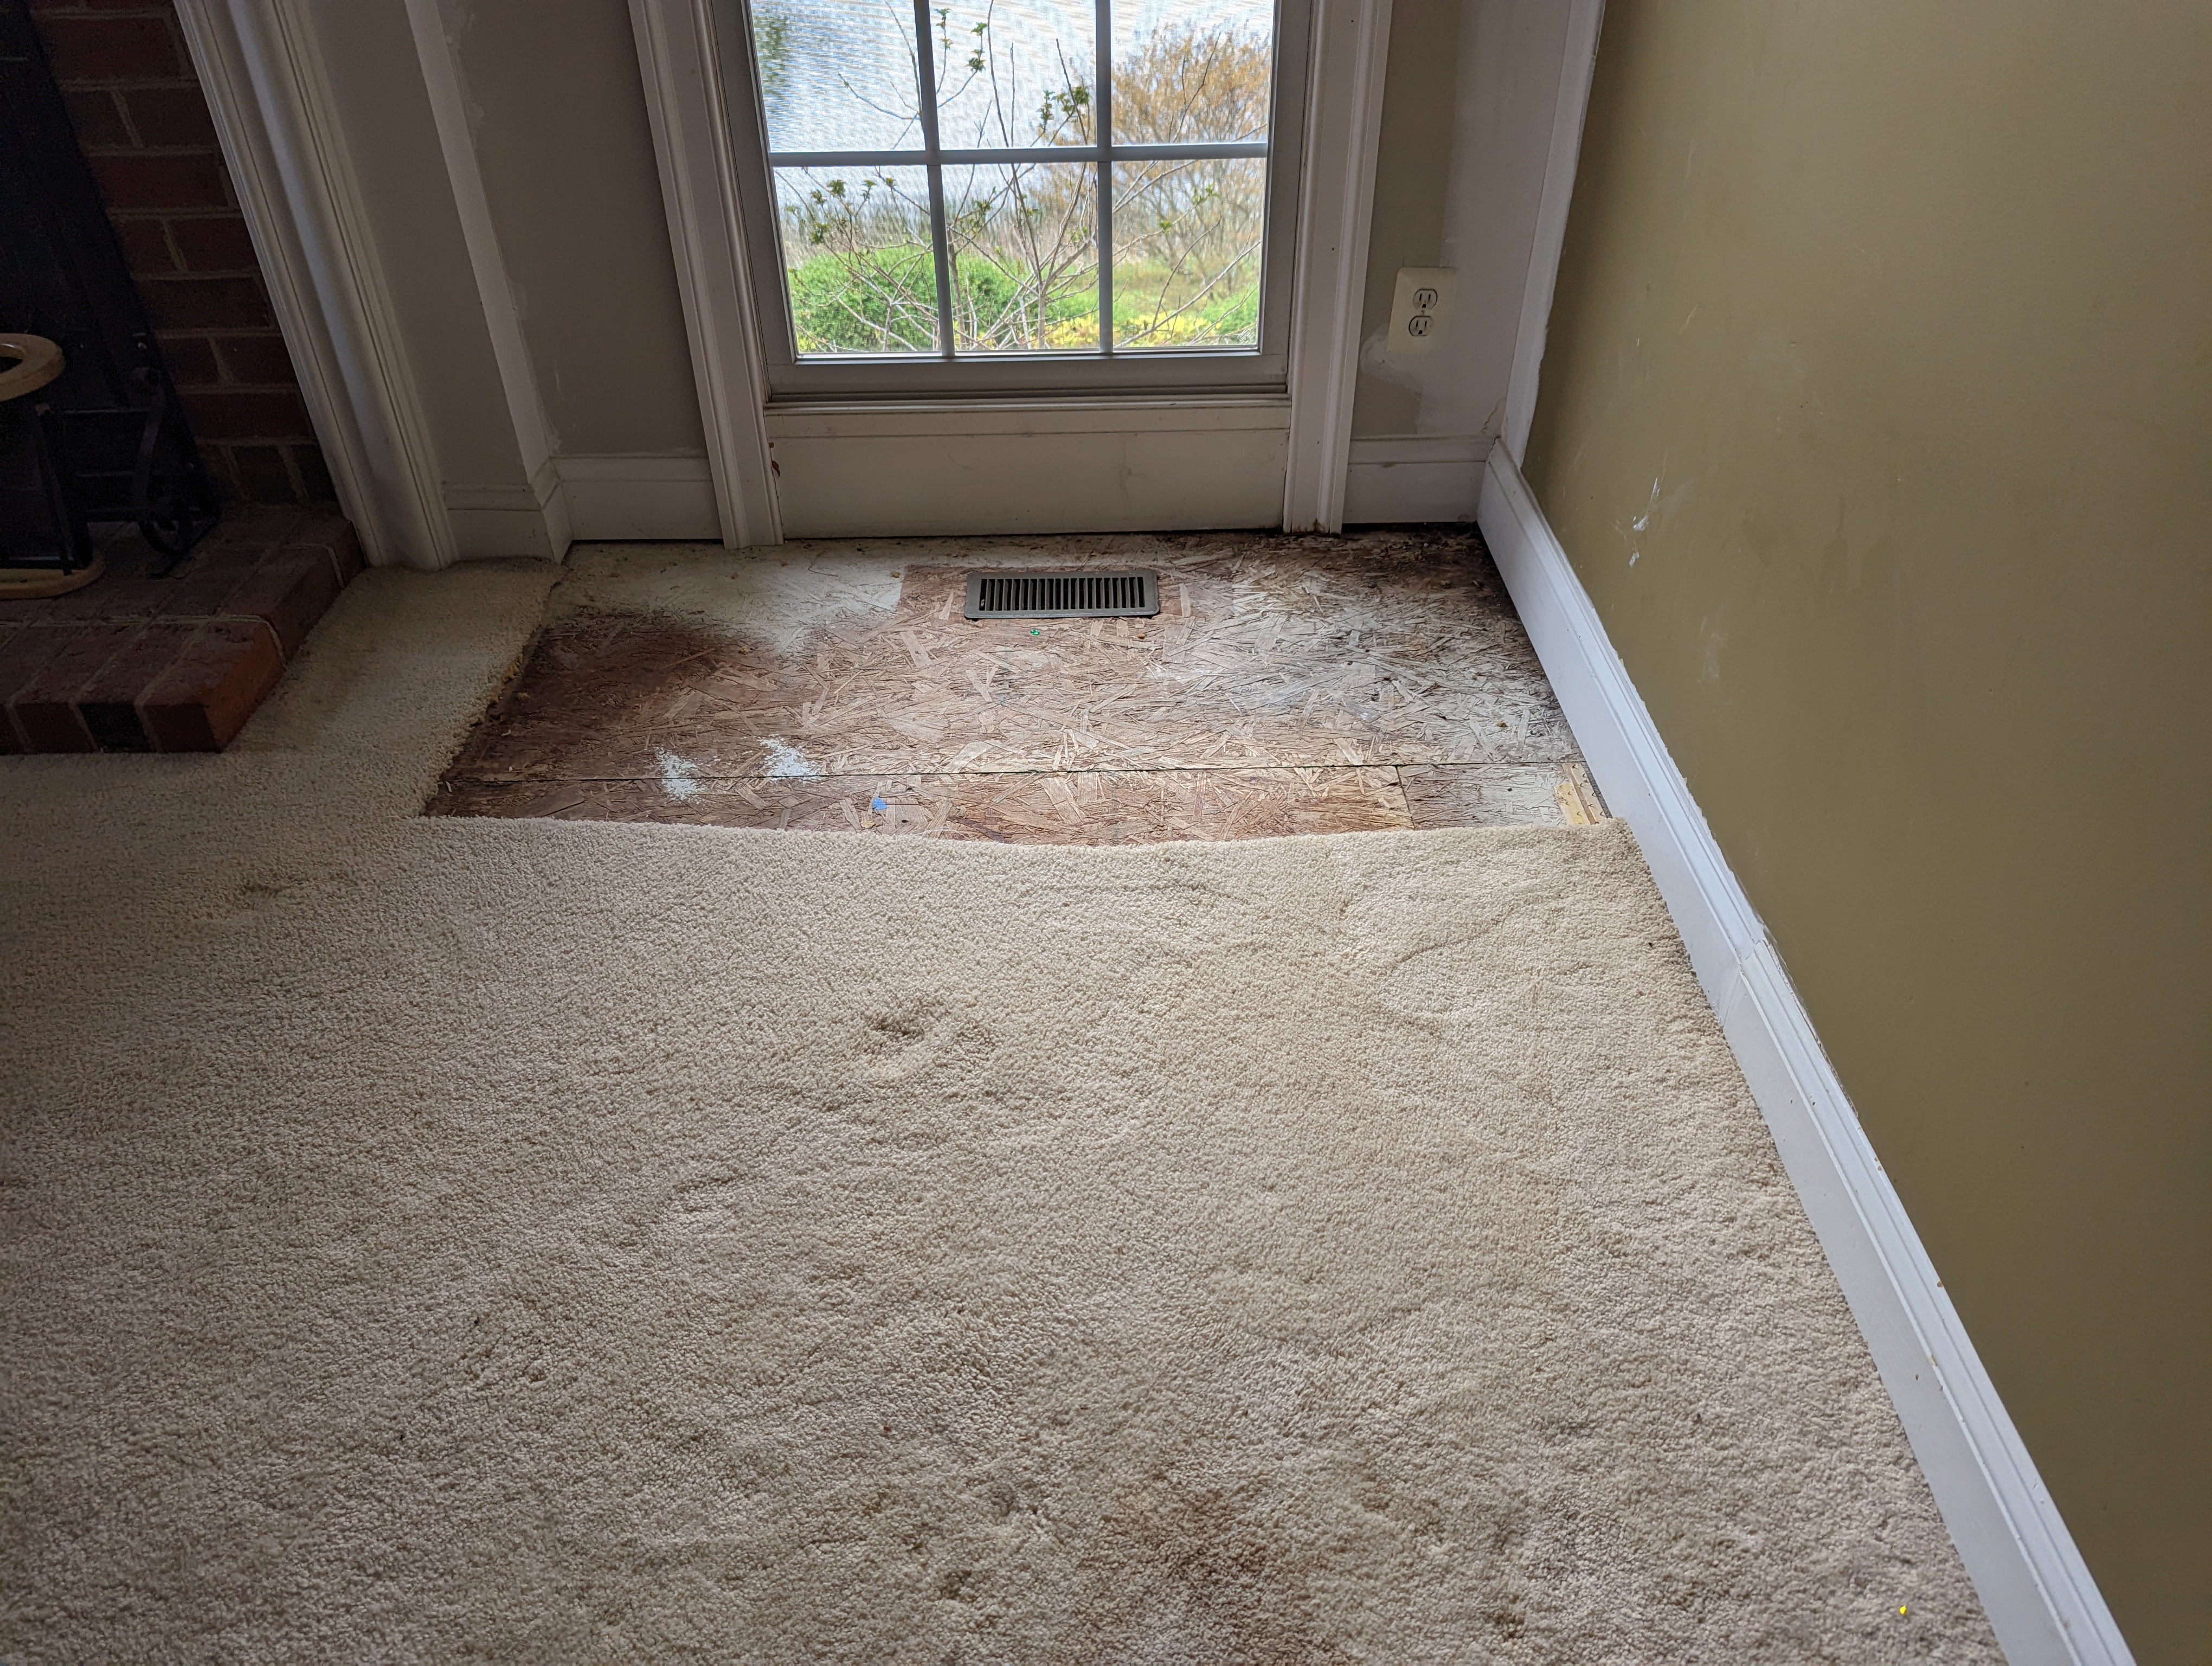 Water Damage in Carpet and Area Rugs